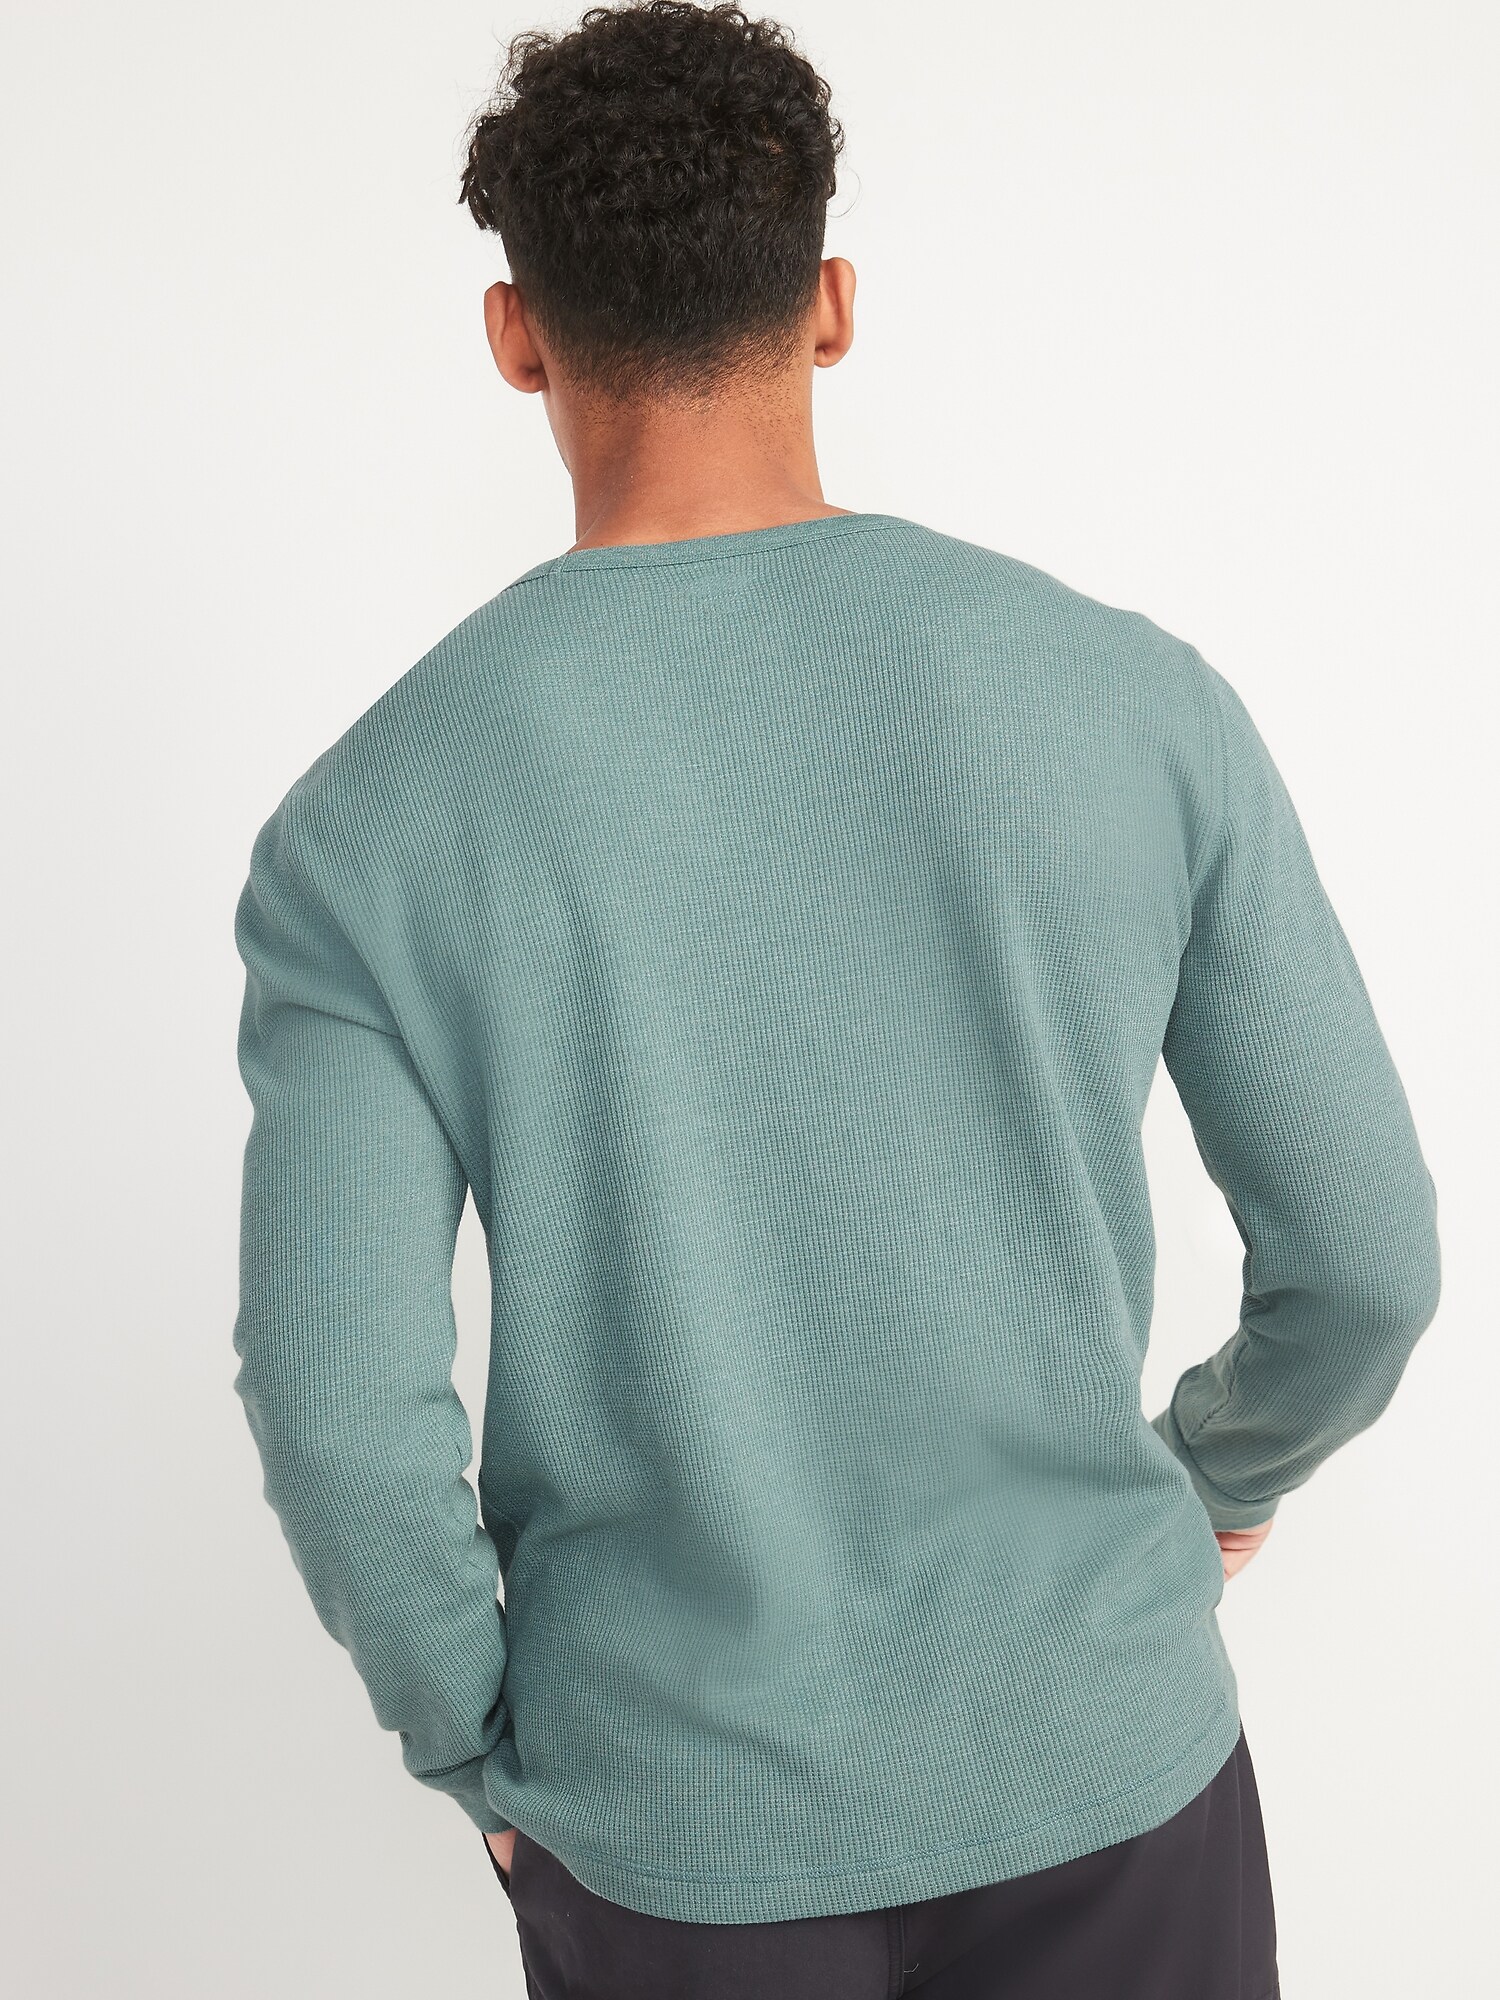 Thermal-Knit Long-Sleeve T-Shirt for Men | Old Navy